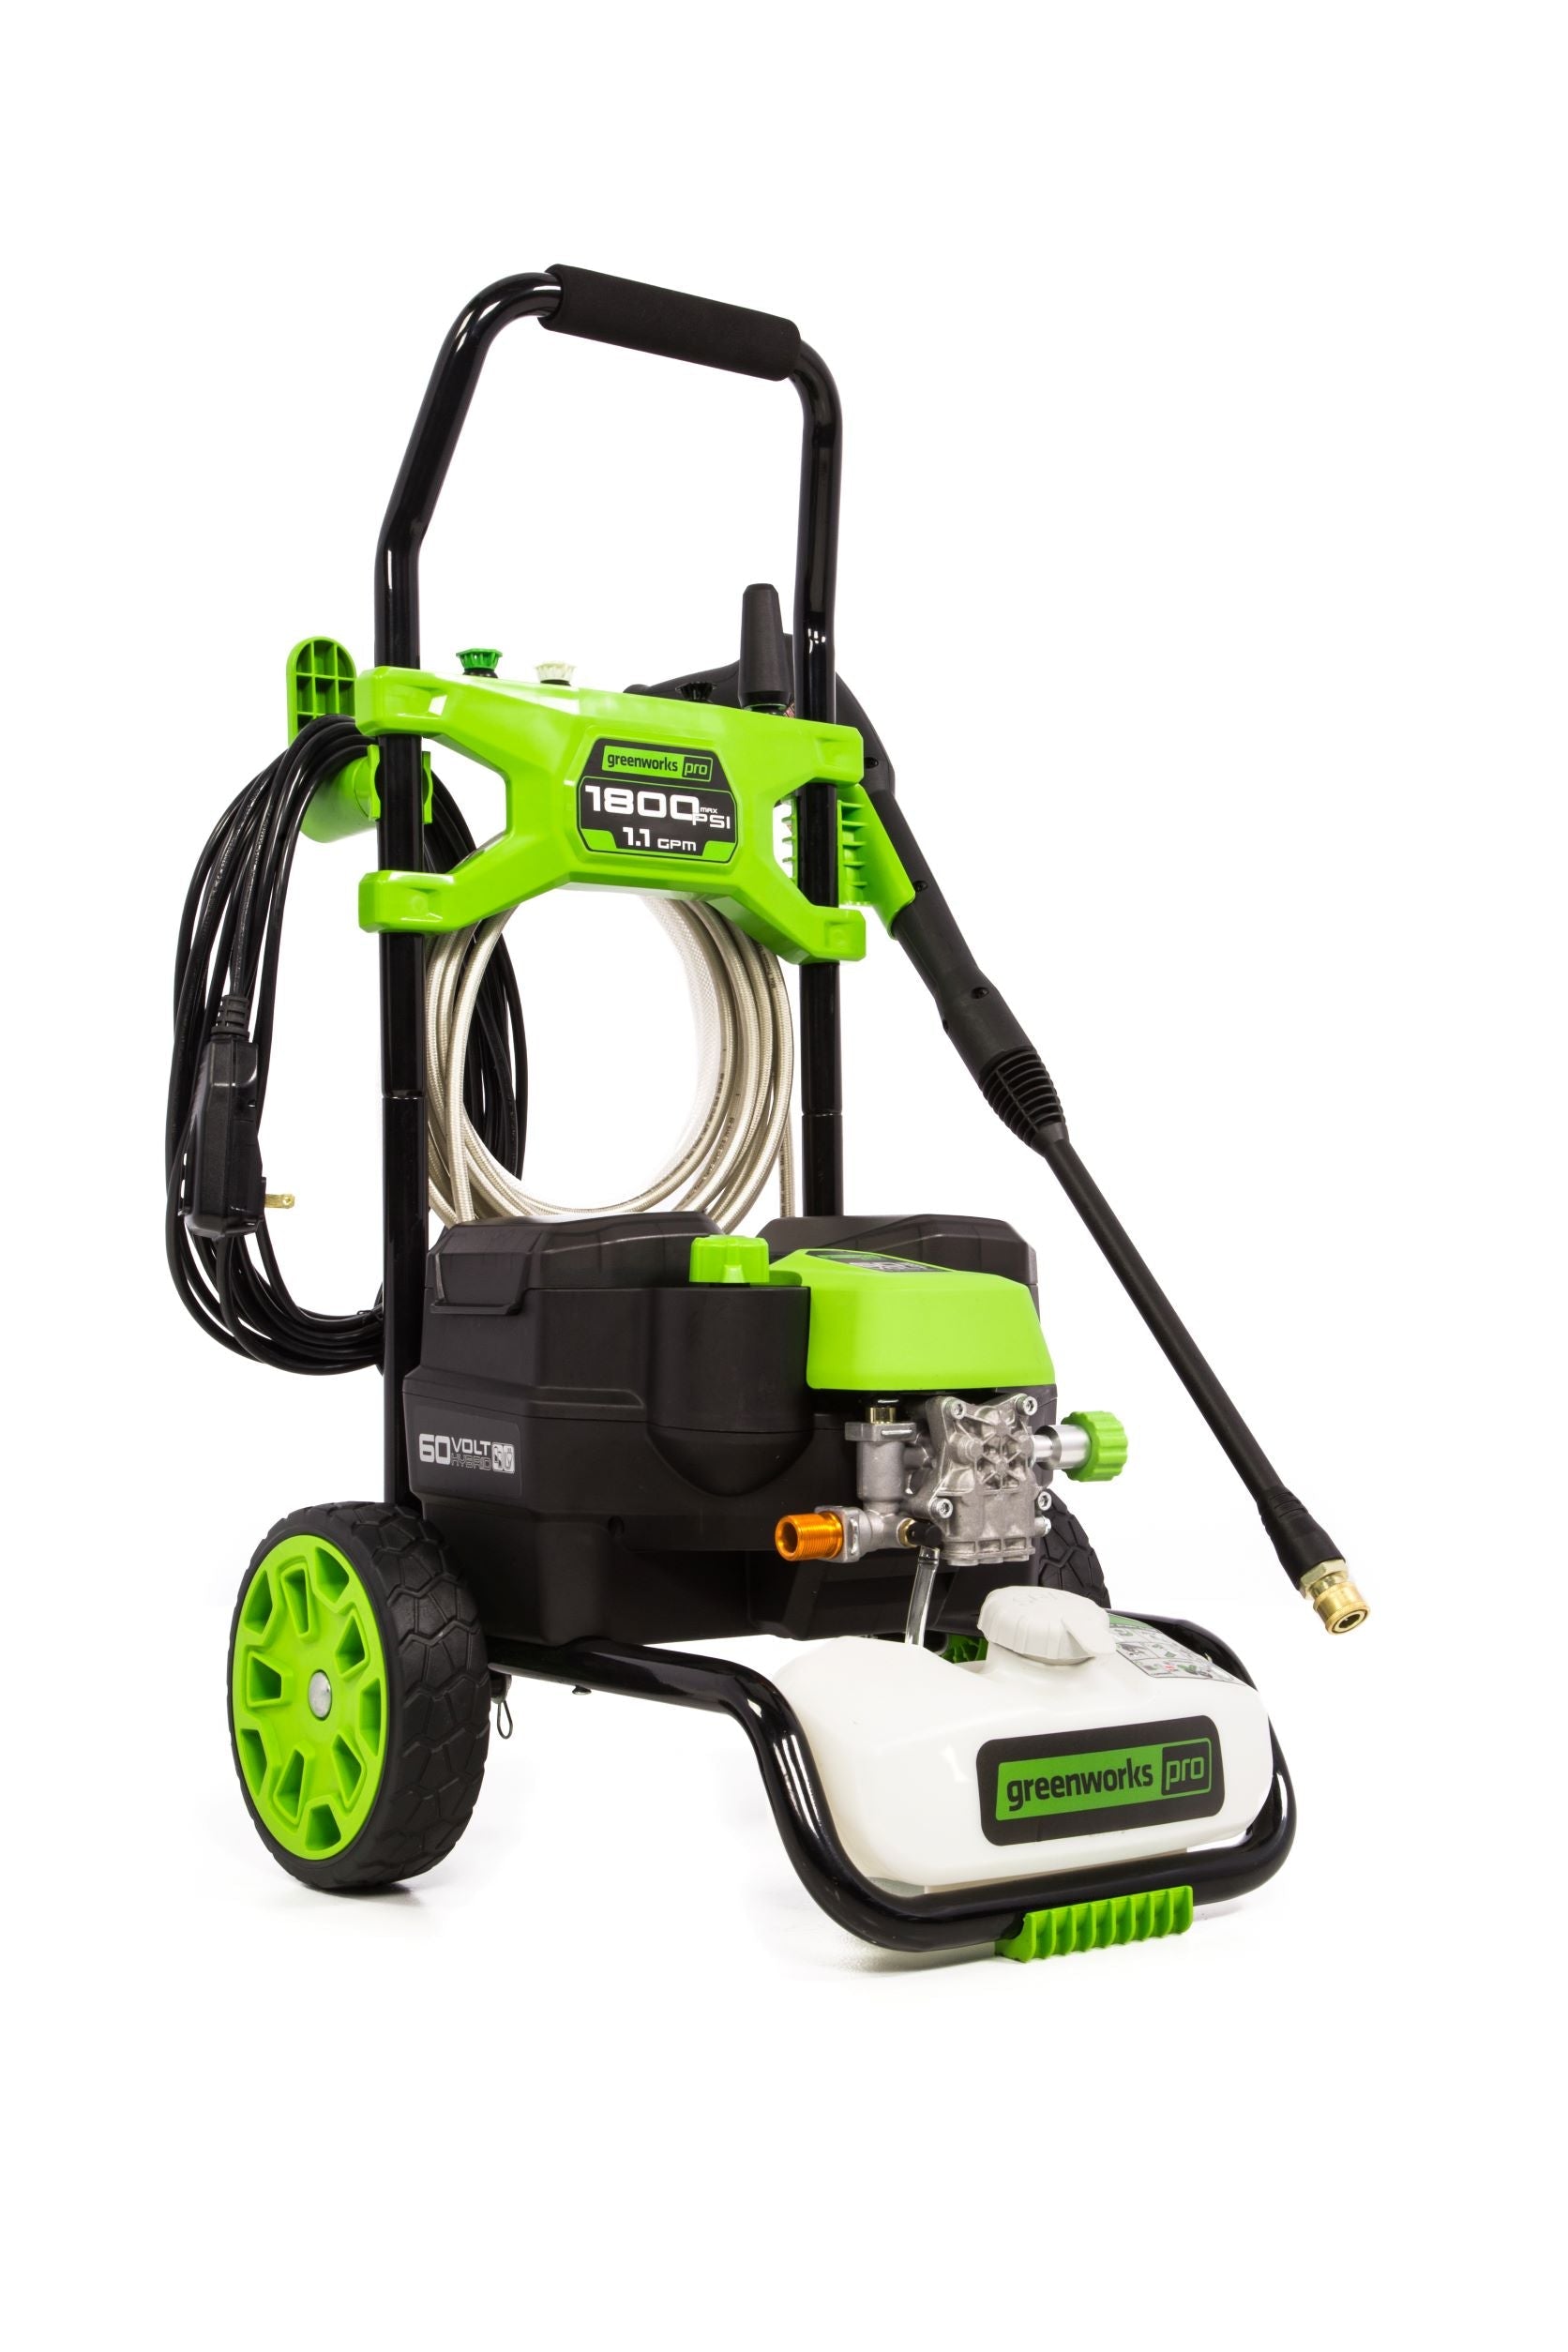 60V Hybrid 1800 PSI 1.1 GPM Cold Water Pressure Washer w/ (2) 4Ah Batteries & Charger